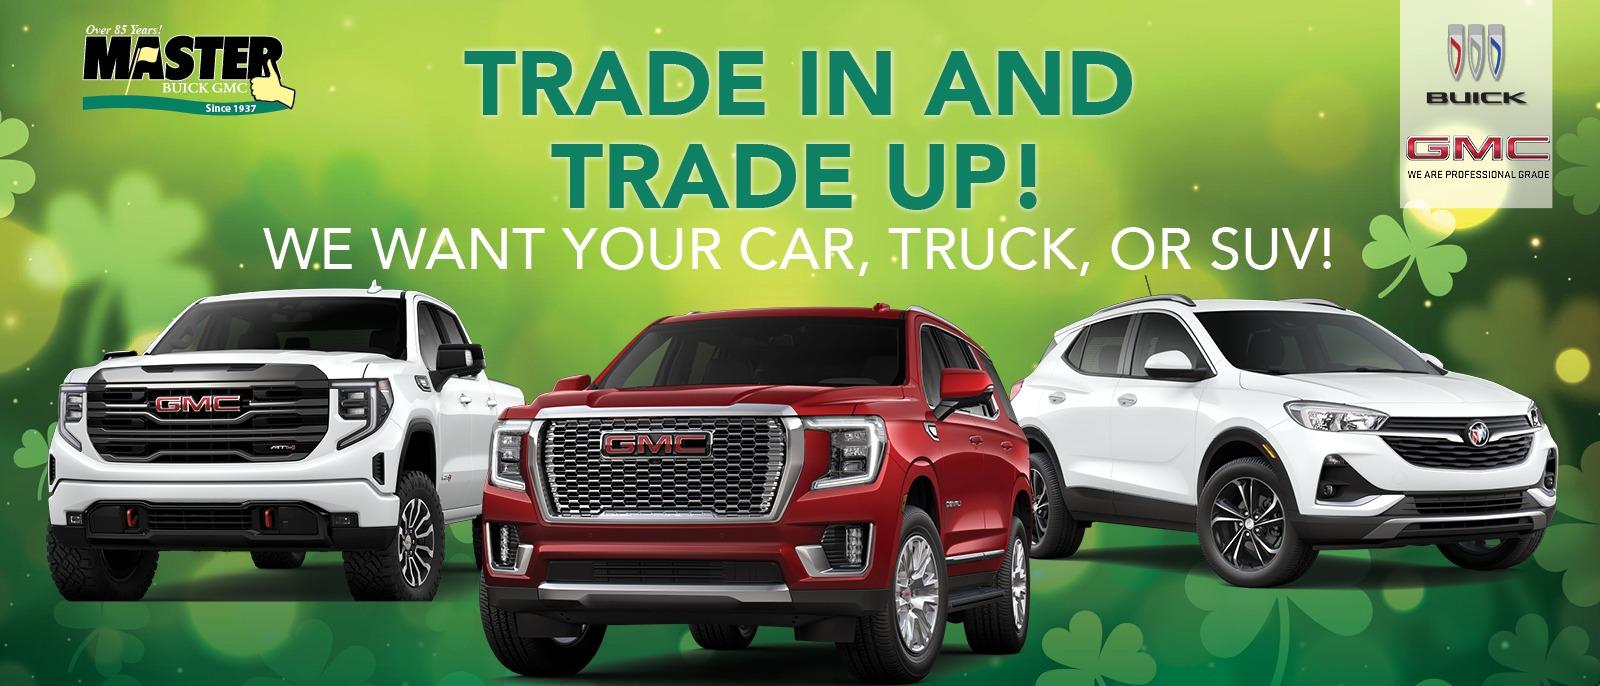 We want your car, truck, or SUV!